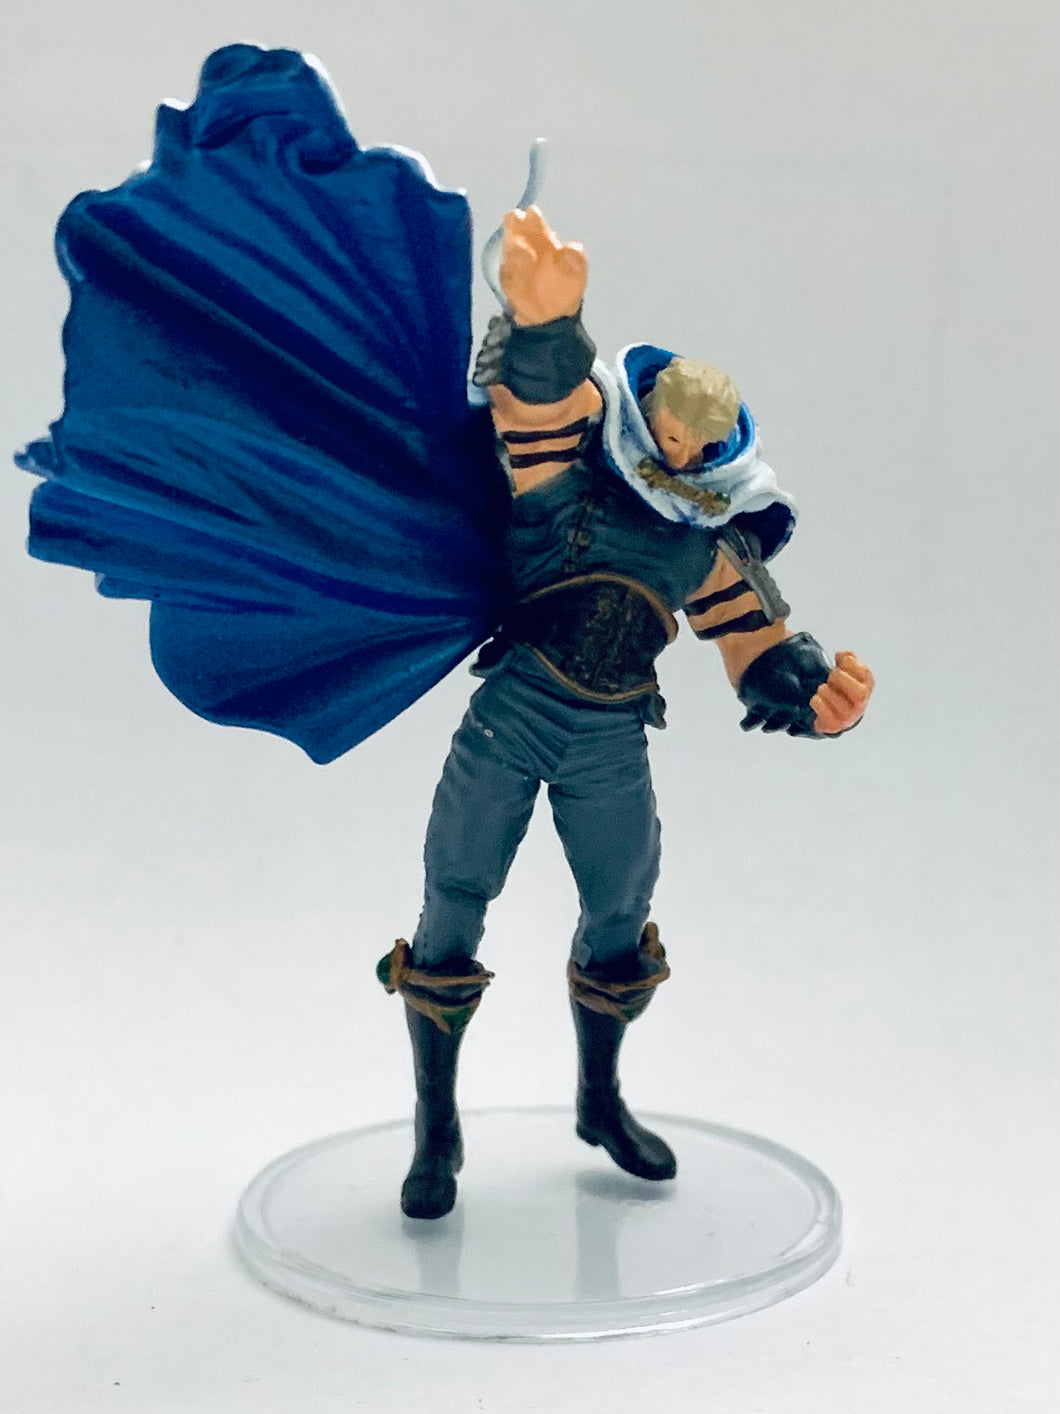 Hokuto no Ken - Ryuga - Fist of the North Star All-Star Retsuden Capsule Figure Collection Part 4 - Advent! End of the Century Conqueror